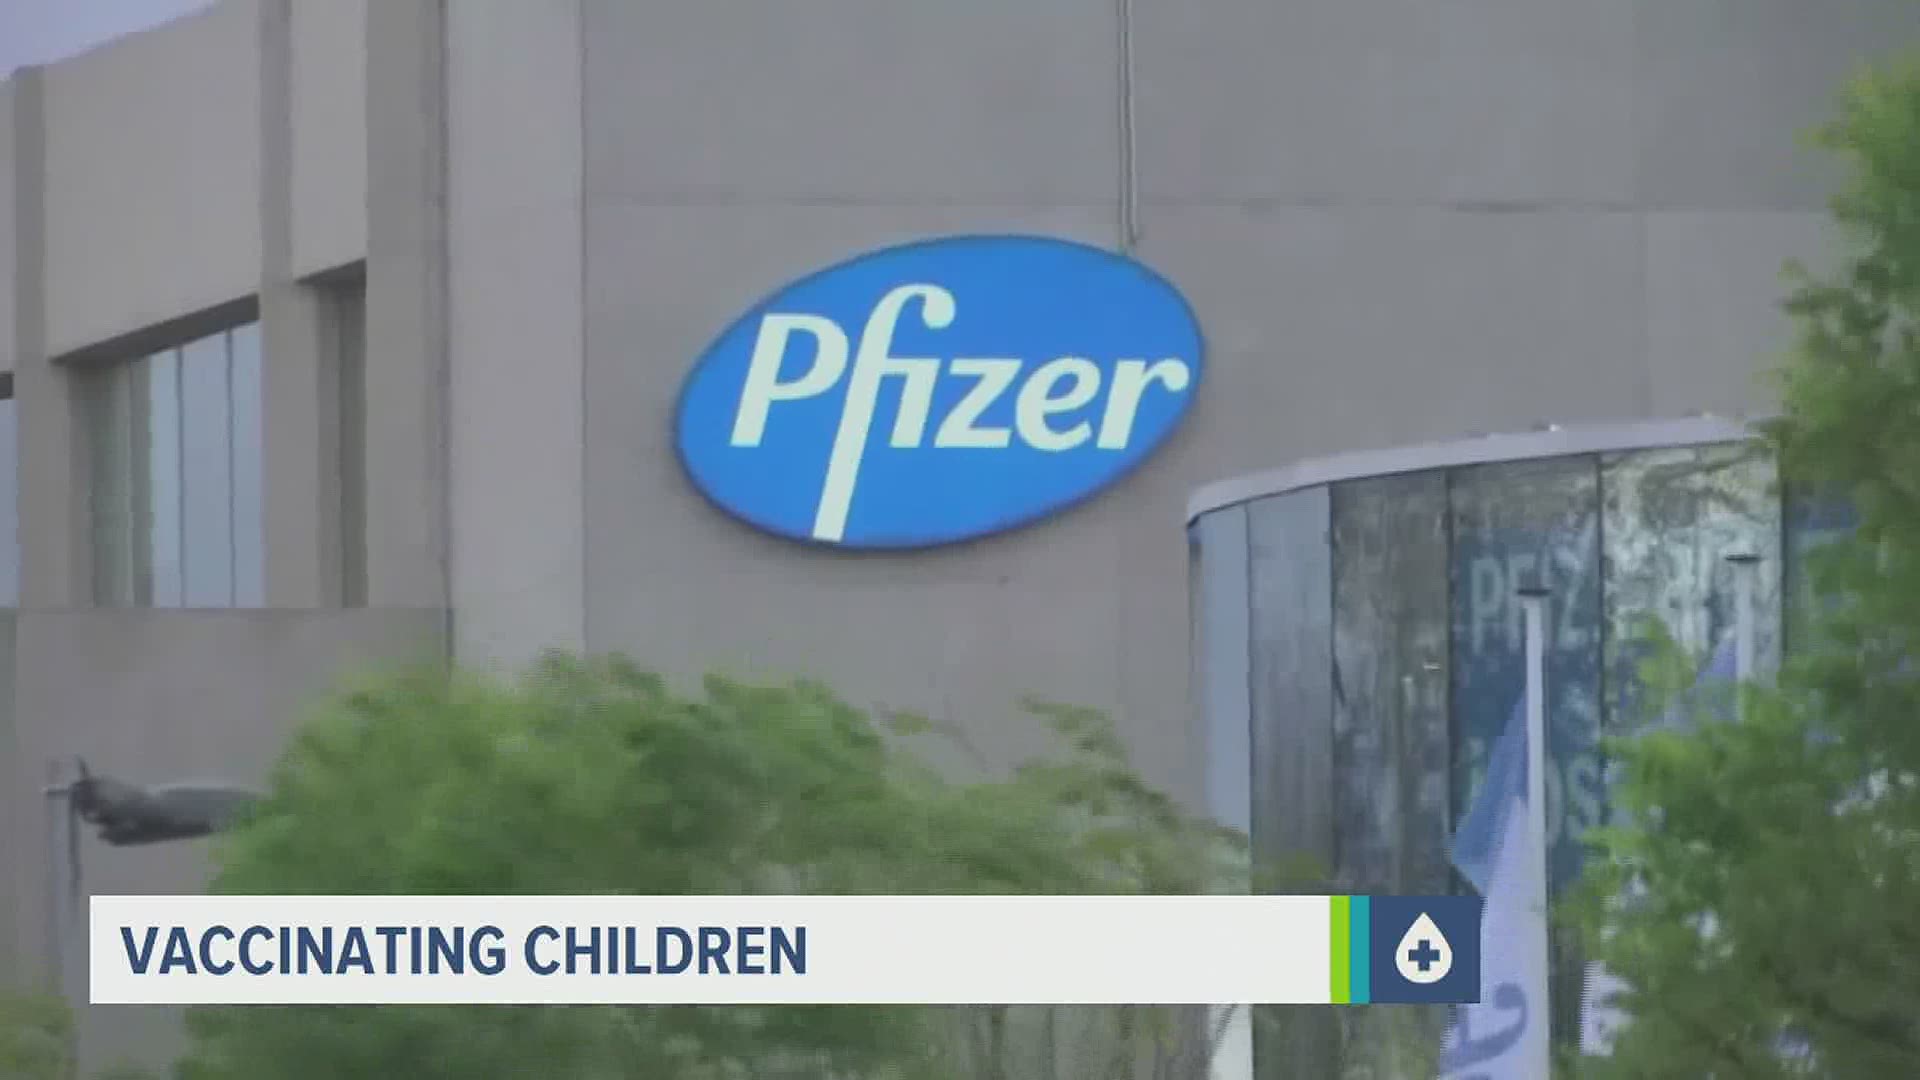 Pfizer is seeking FDA approval to open its vaccine up to 12-15-year-olds. Currently, the minimum age is 16.